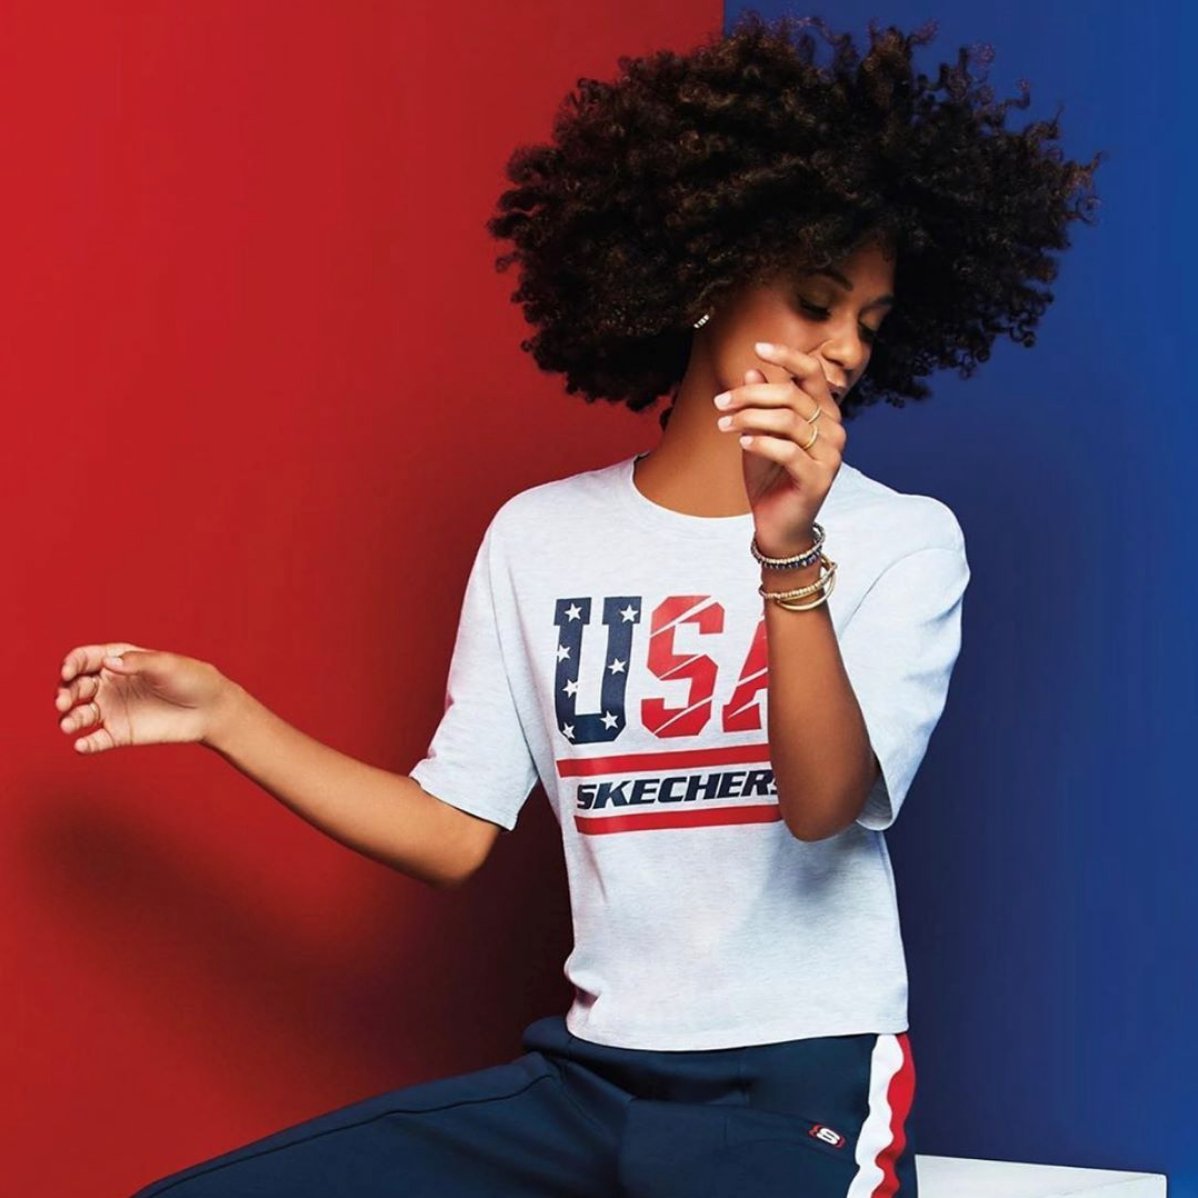 Stand out in bold, all-American style! 🇺🇲💋💪🏼 #SkechersApparel #workout #fashion #USA

Featured style:
skechers.com/en-us/style/W2…